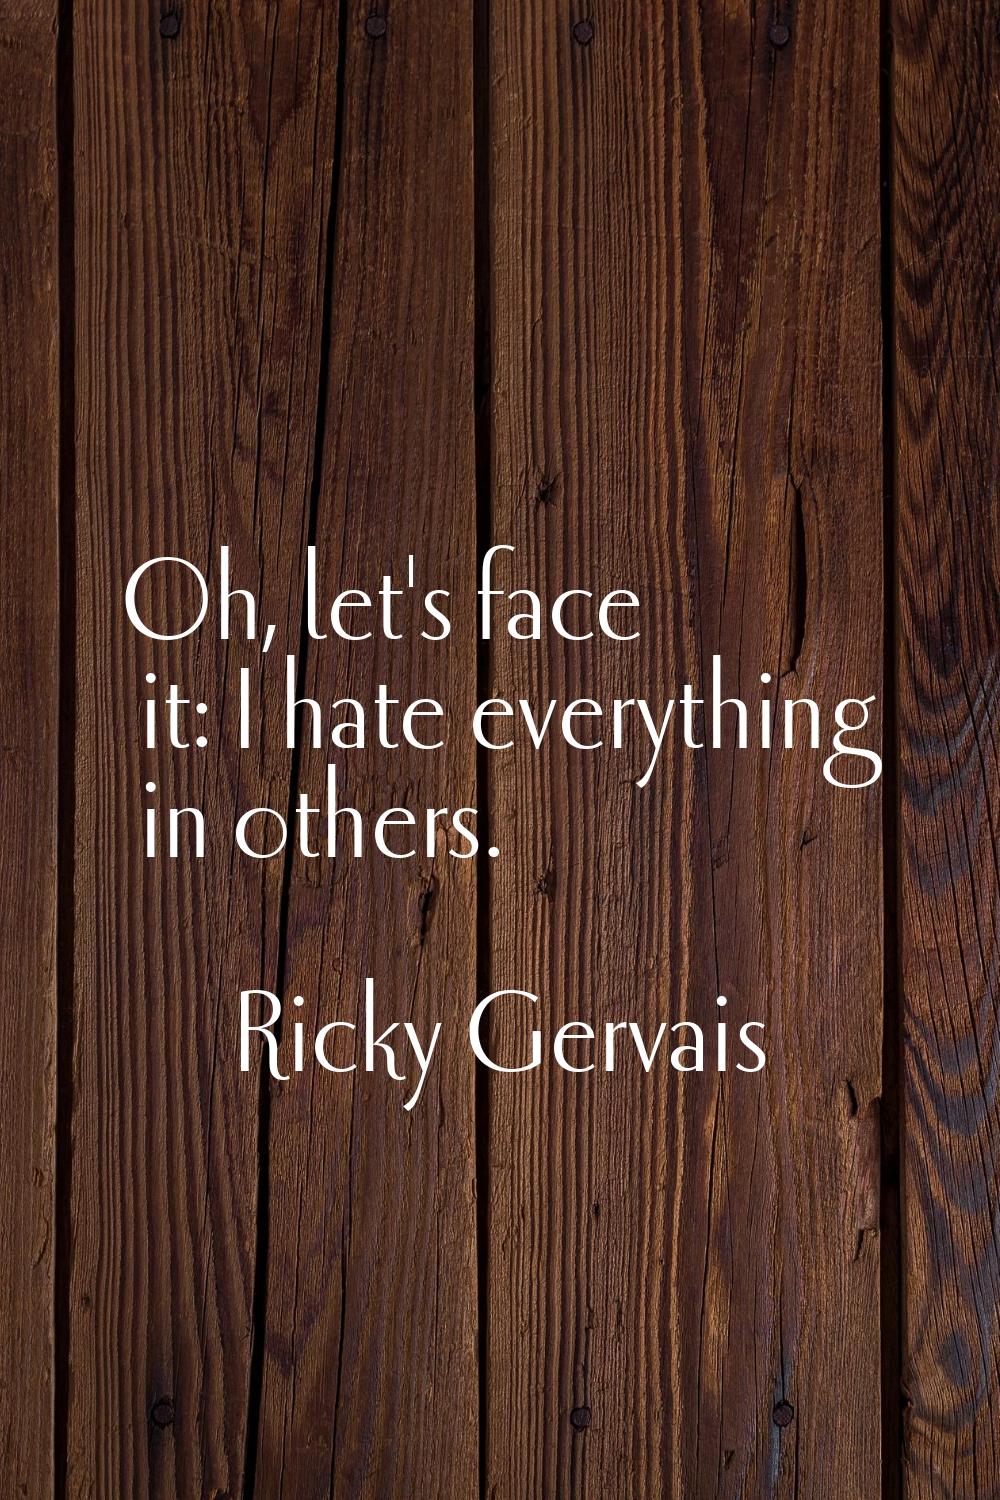 Oh, let's face it: I hate everything in others.